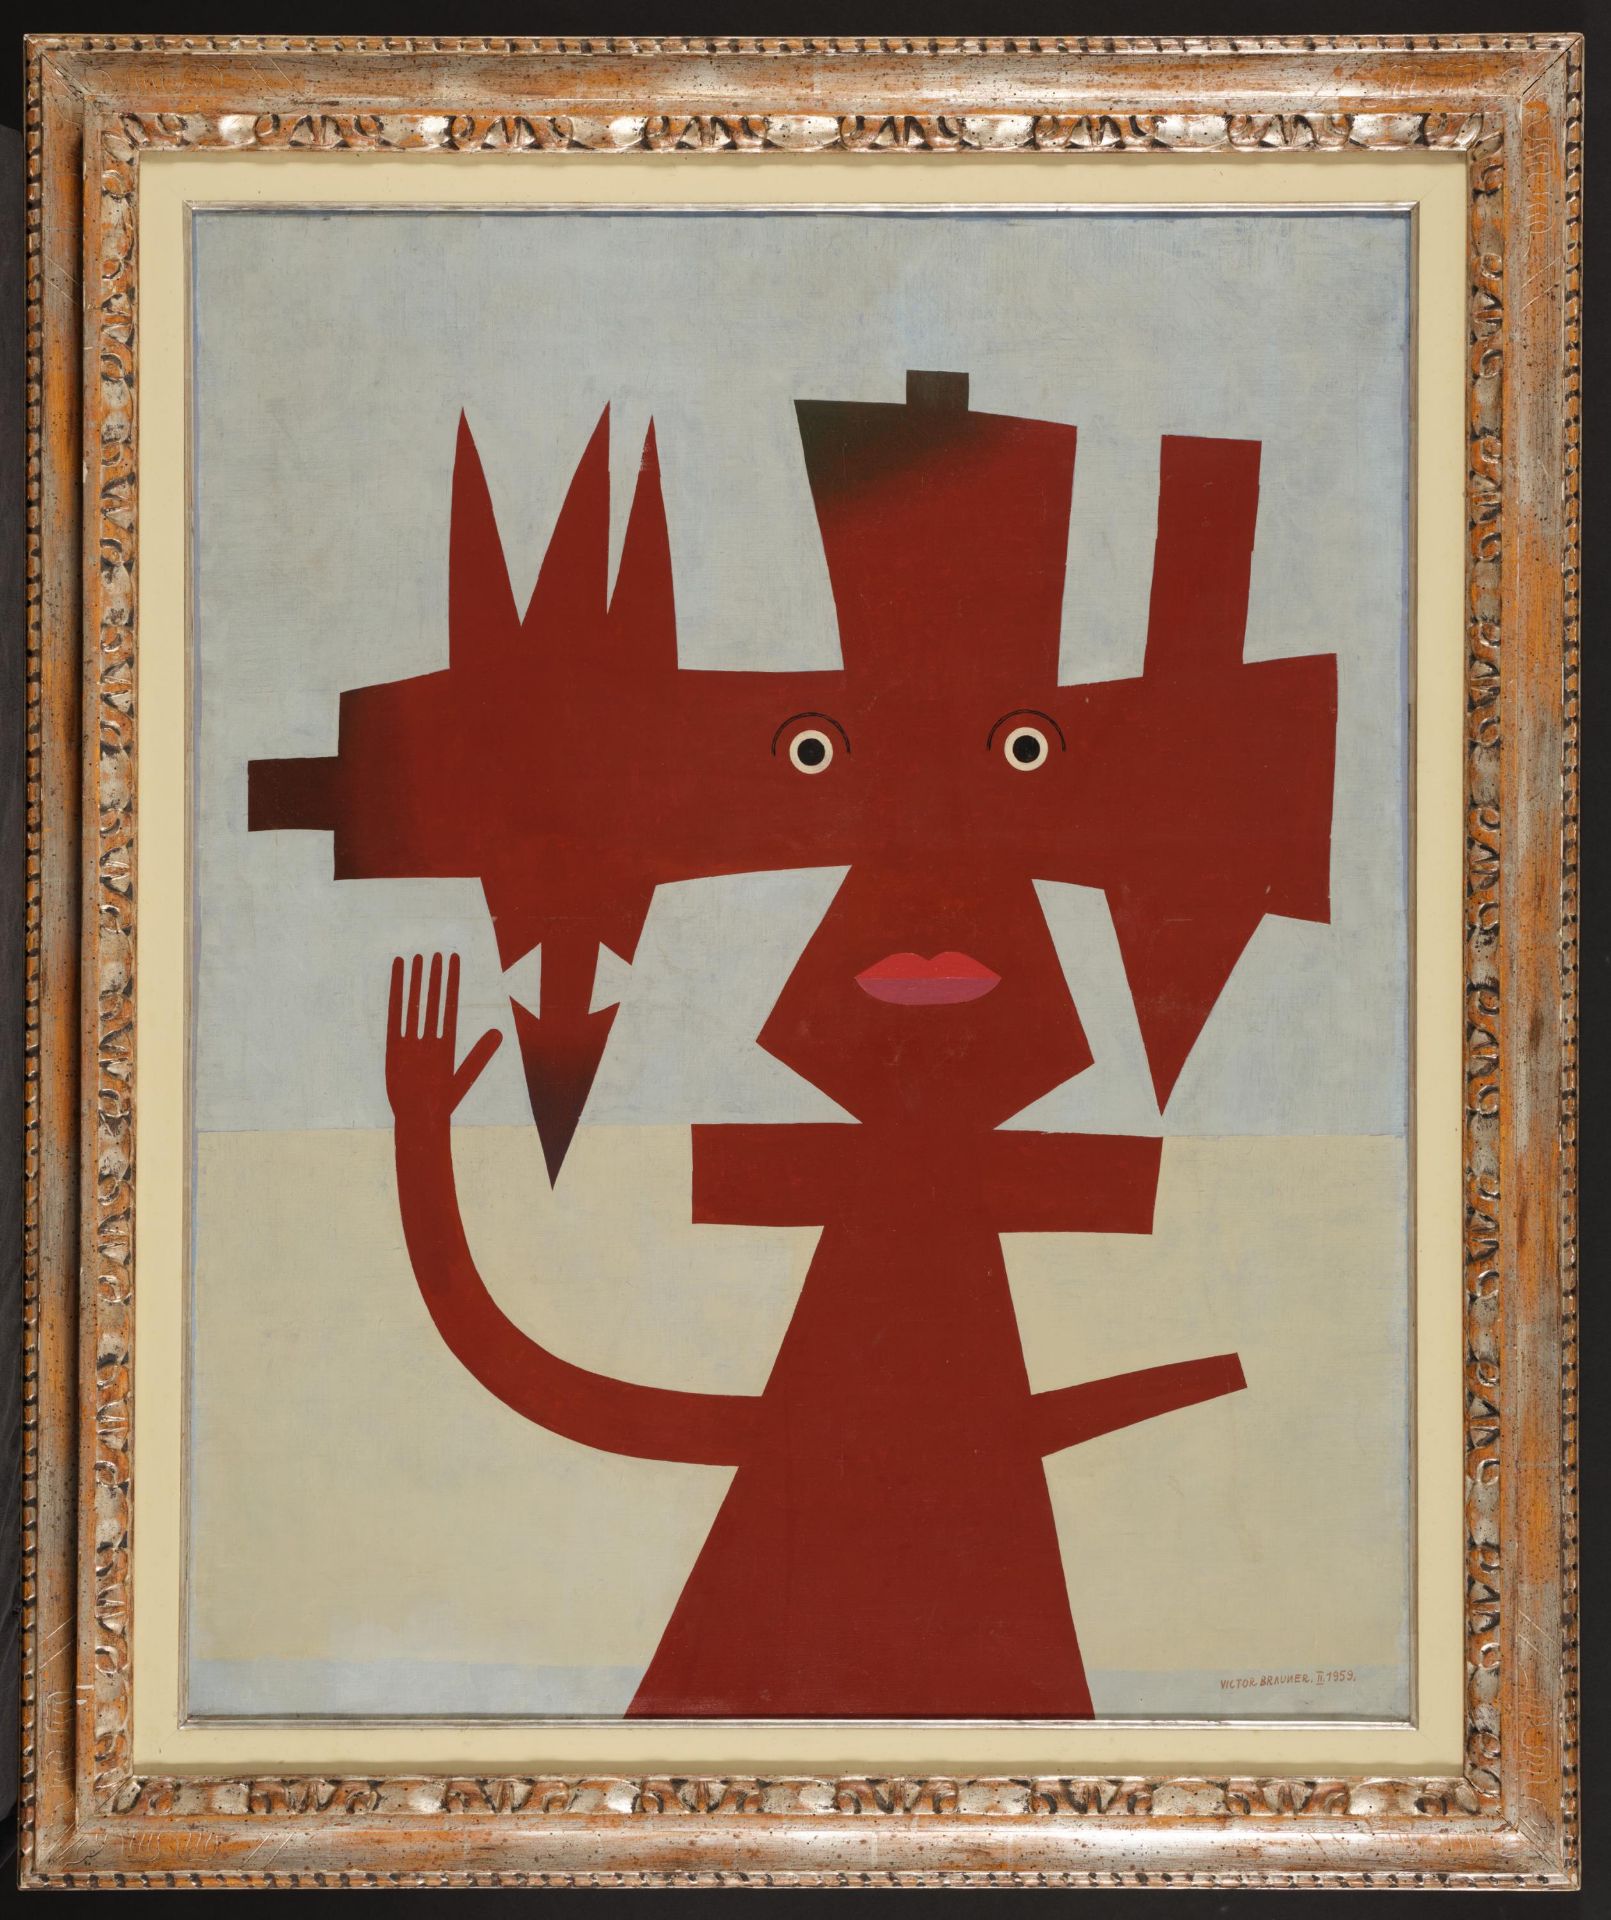 Victor Brauner: "Outil Spirituel III" - Image 2 of 4